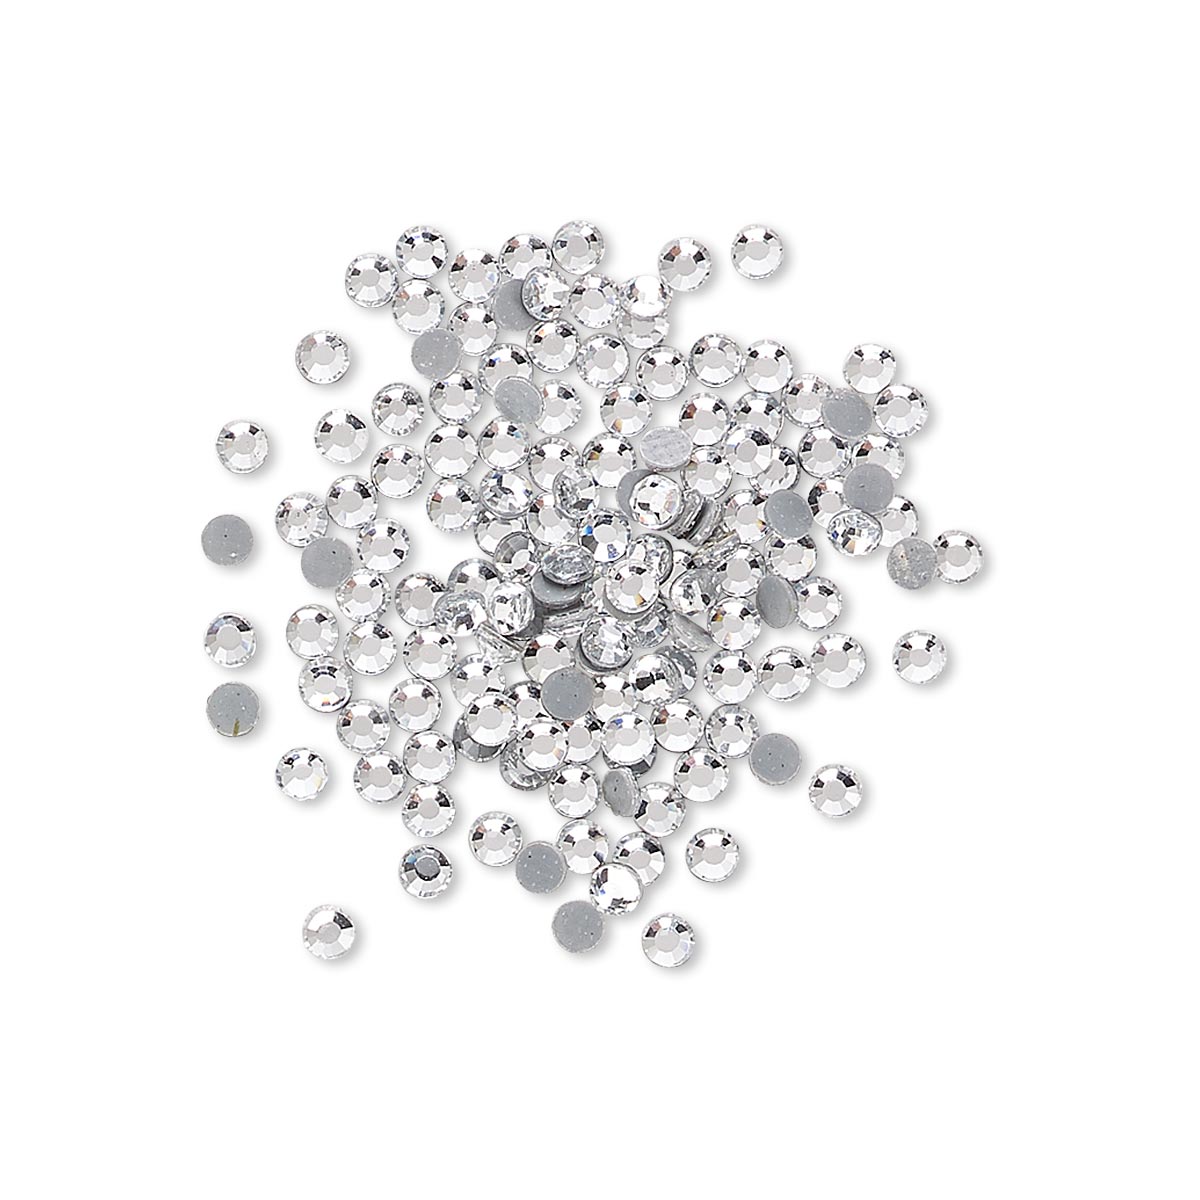 Flat back, hot-fix glass rhinestone, crystal clear, 1.9-2.1mm faceted ...